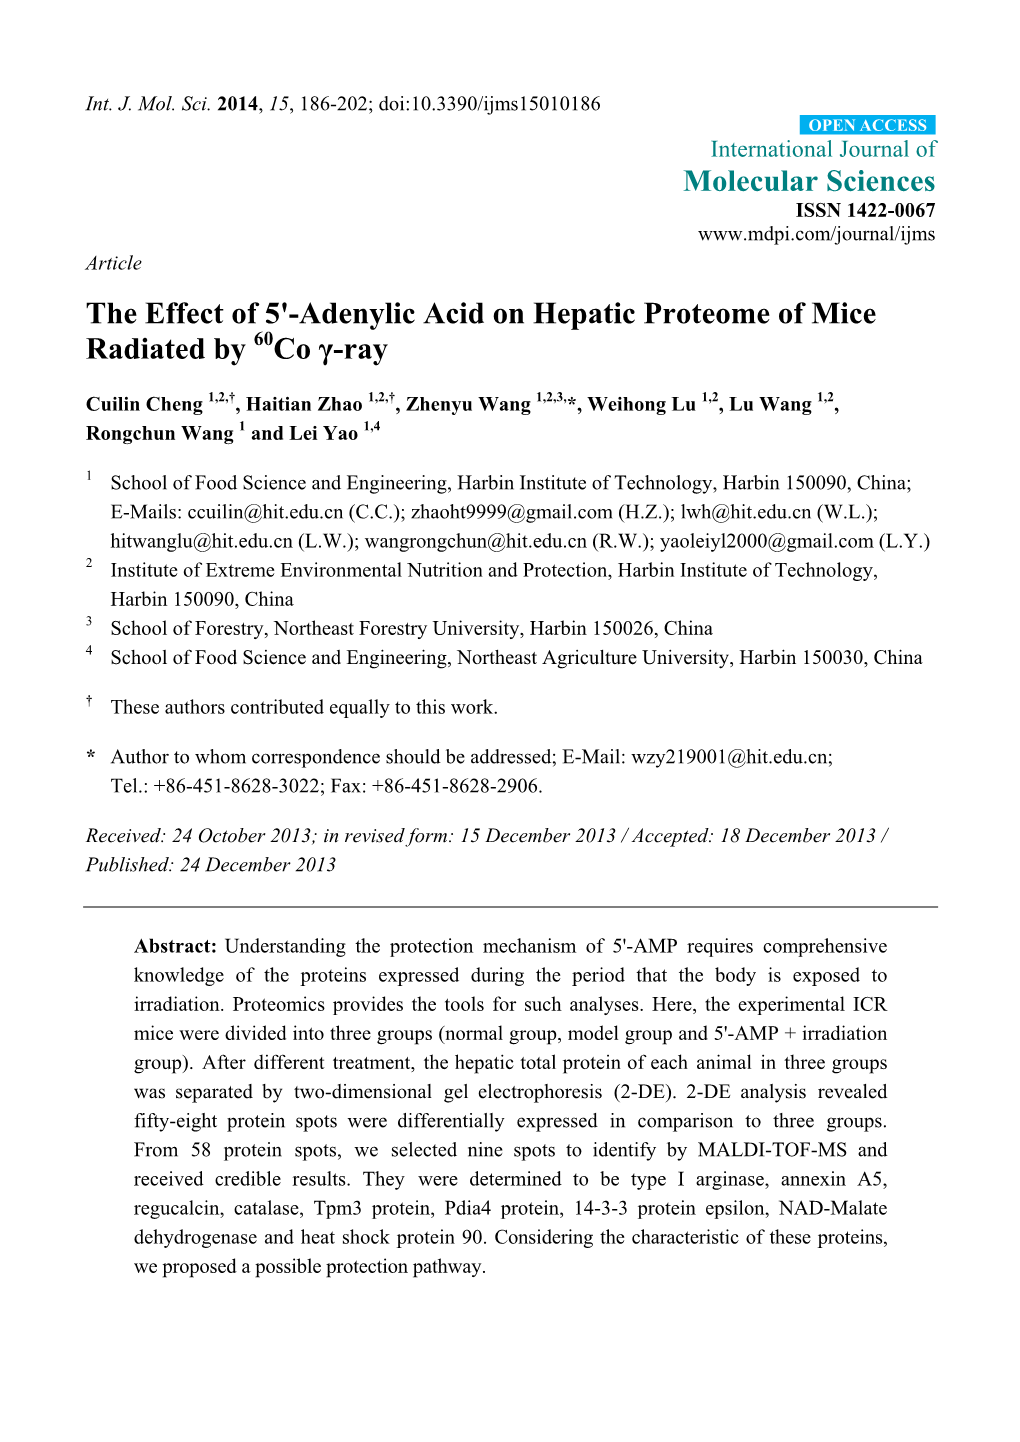 Adenylic Acid on Hepatic Proteome of Mice Radiated by 60Co Γ-Ray